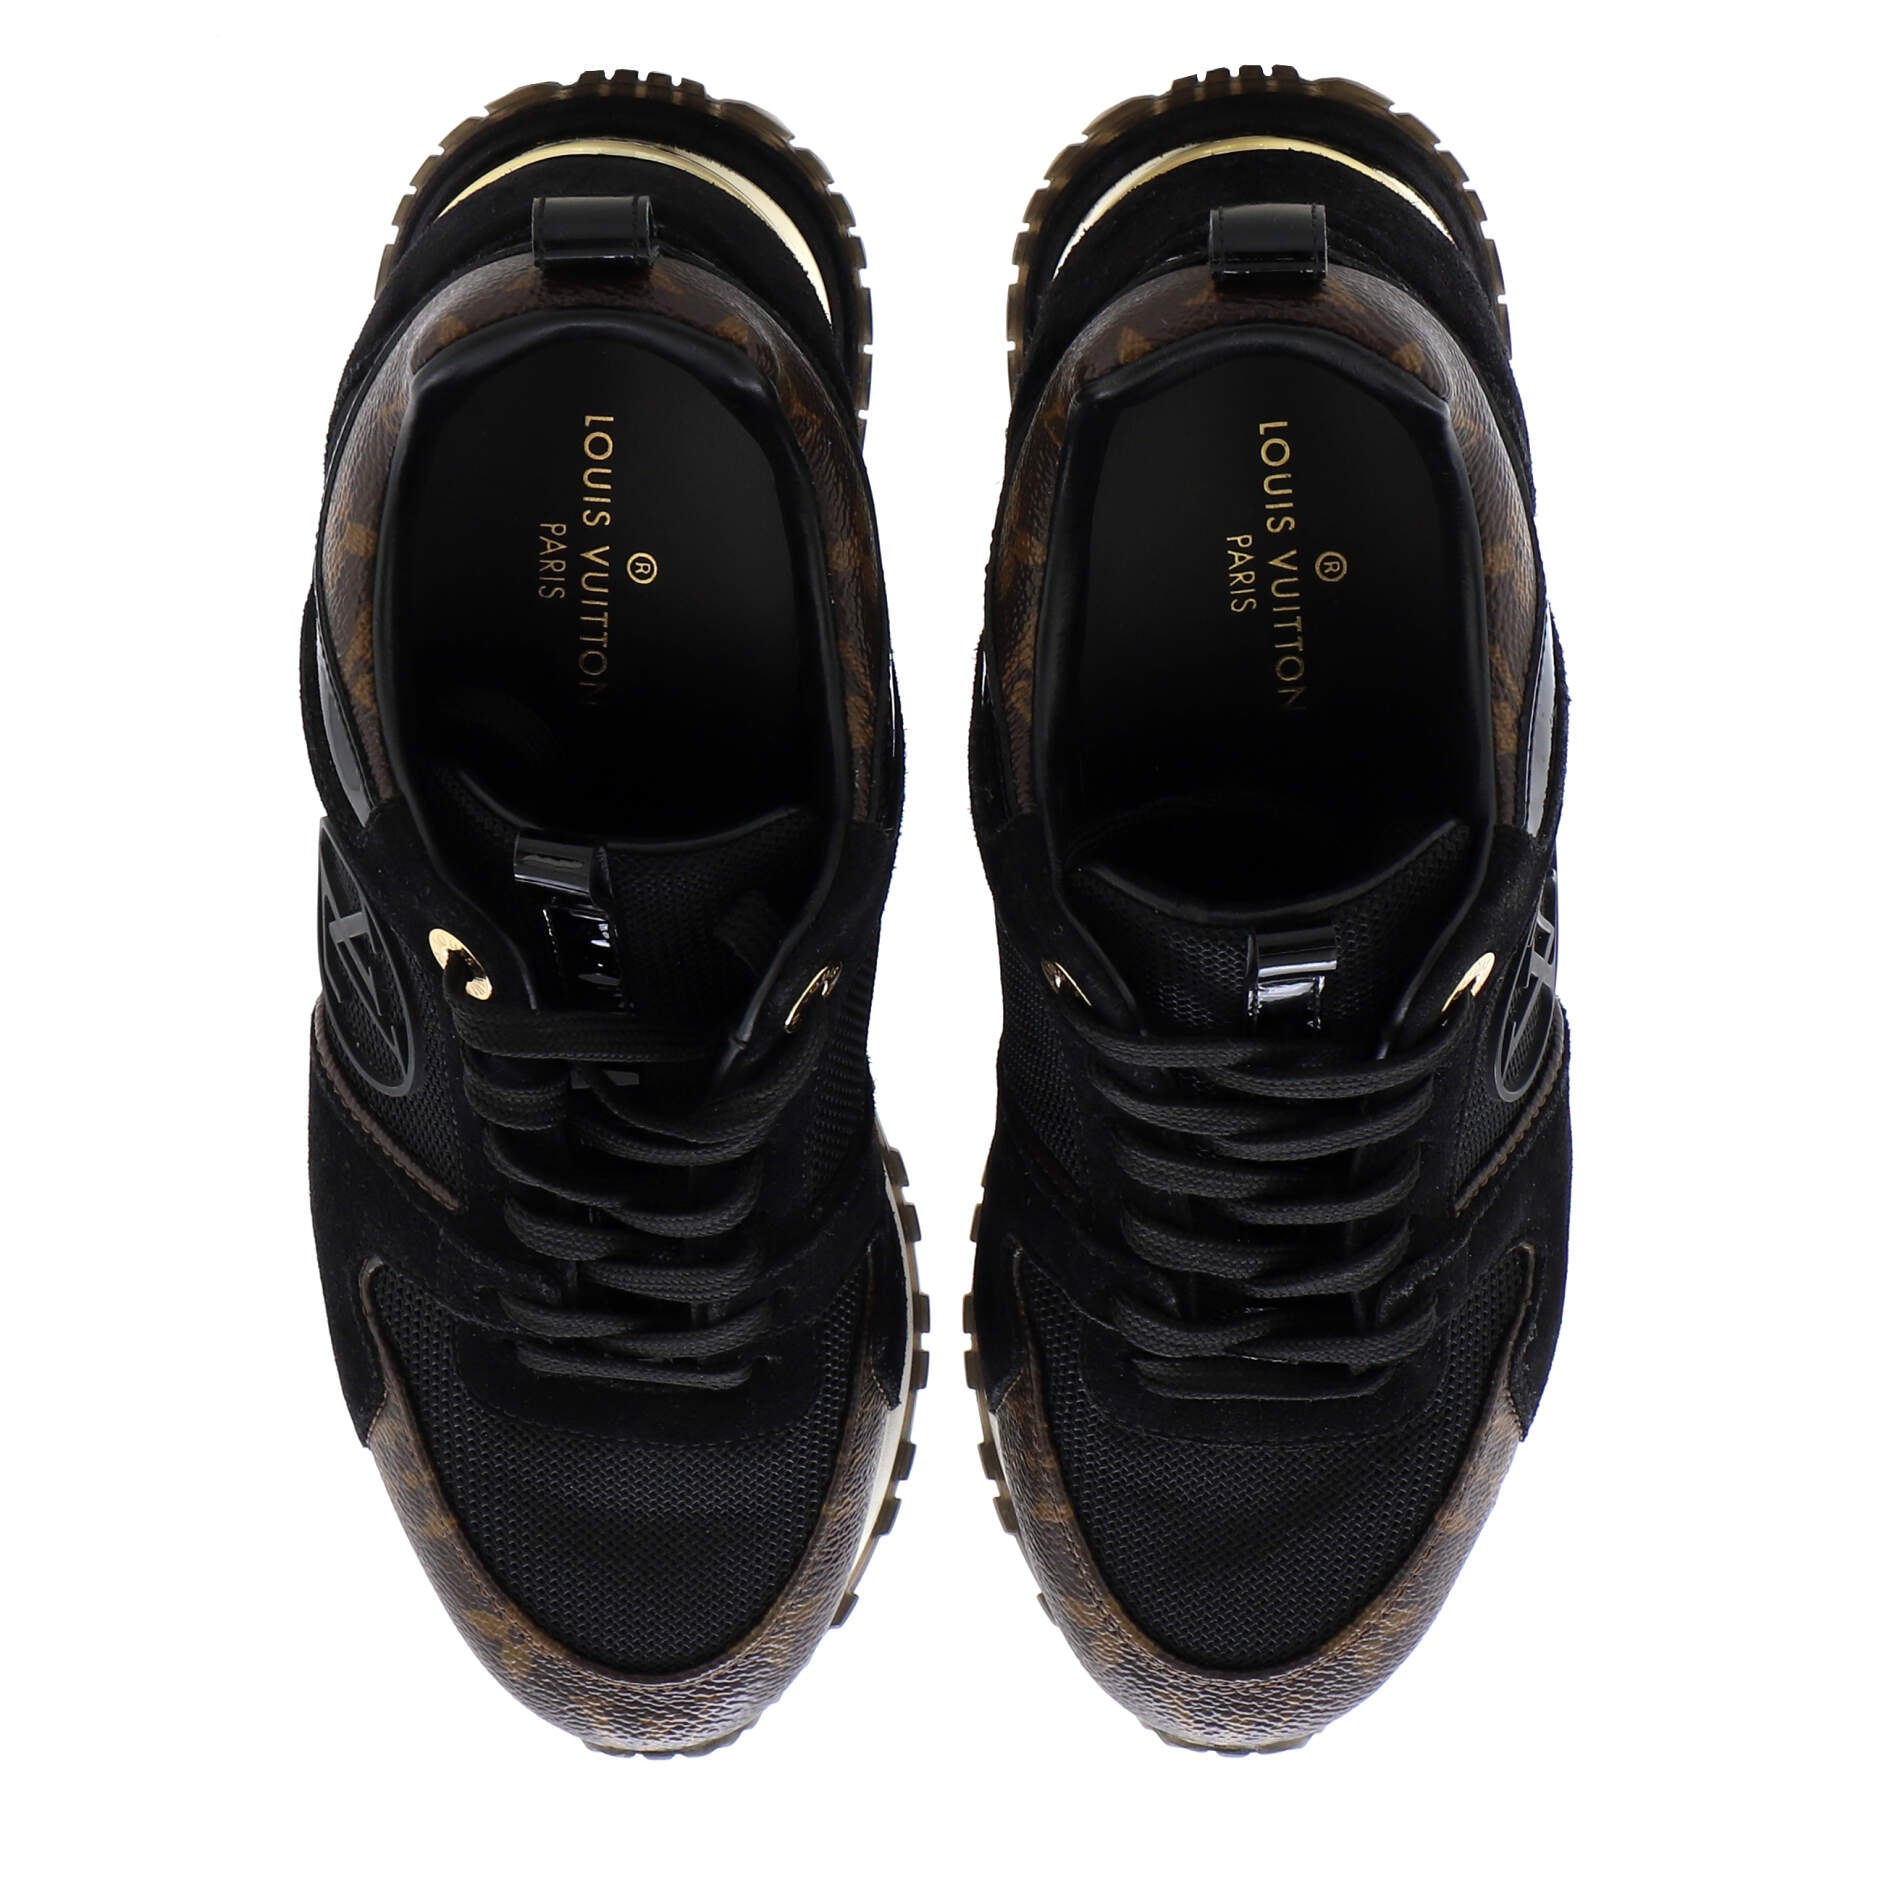 Louis Vuitton Black/Gold Suede And Leather Run Away Sneakers Size